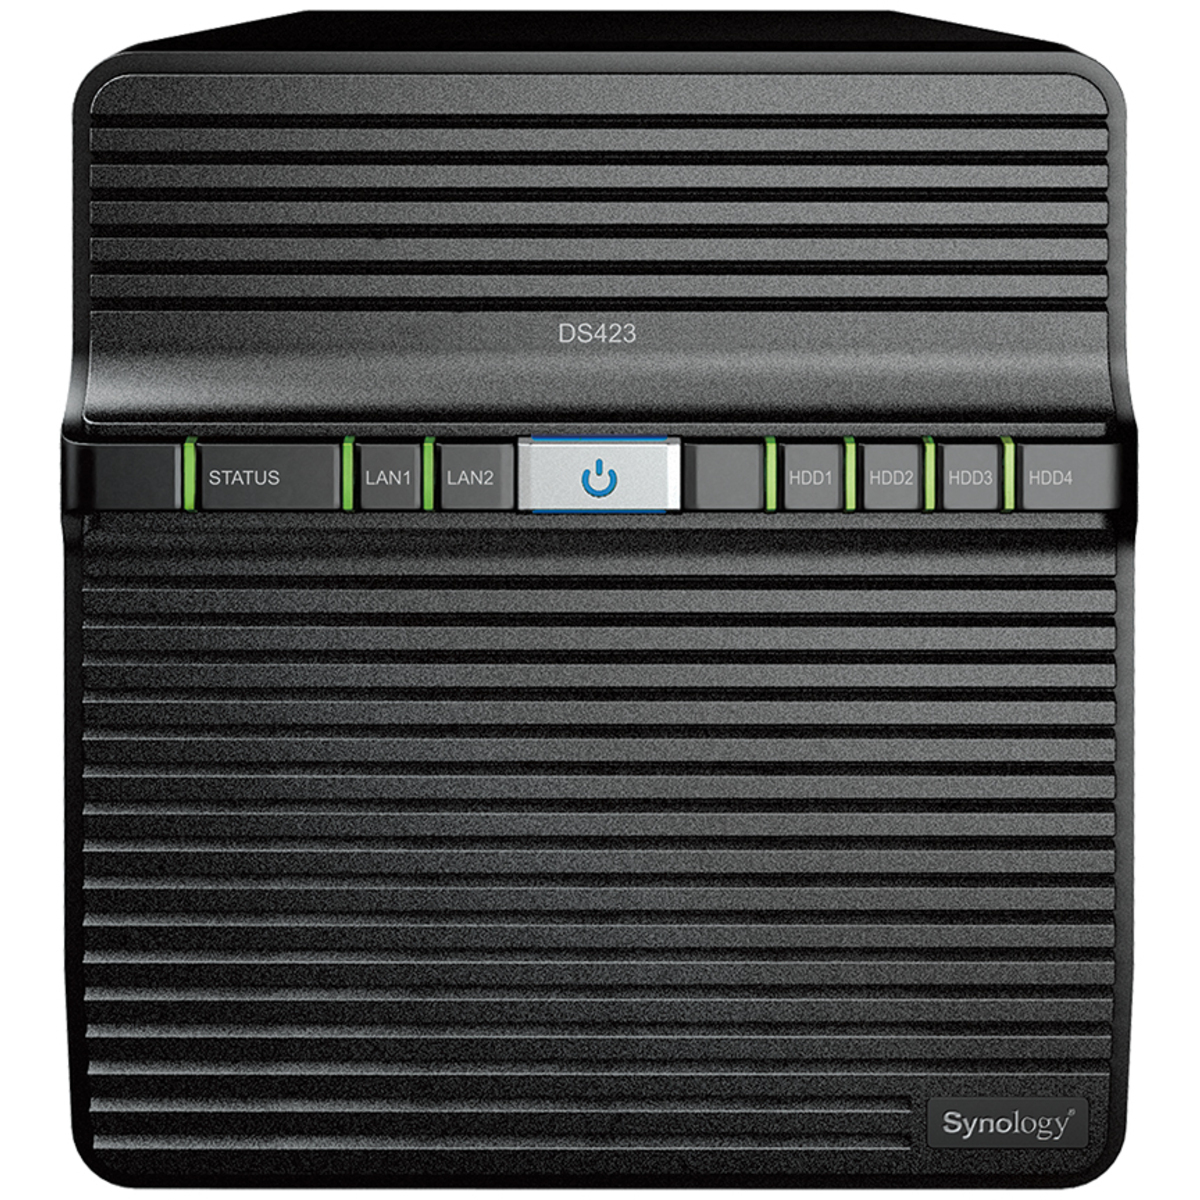 Synology DiskStation DS423 56tb 4-Bay Desktop Personal / Basic Home / Small Office NAS - Network Attached Storage Device 4x14tb Seagate IronWolf Pro ST14000NT001 3.5 7200rpm SATA 6Gb/s HDD NAS Class Drives Installed - Burn-In Tested DiskStation DS423